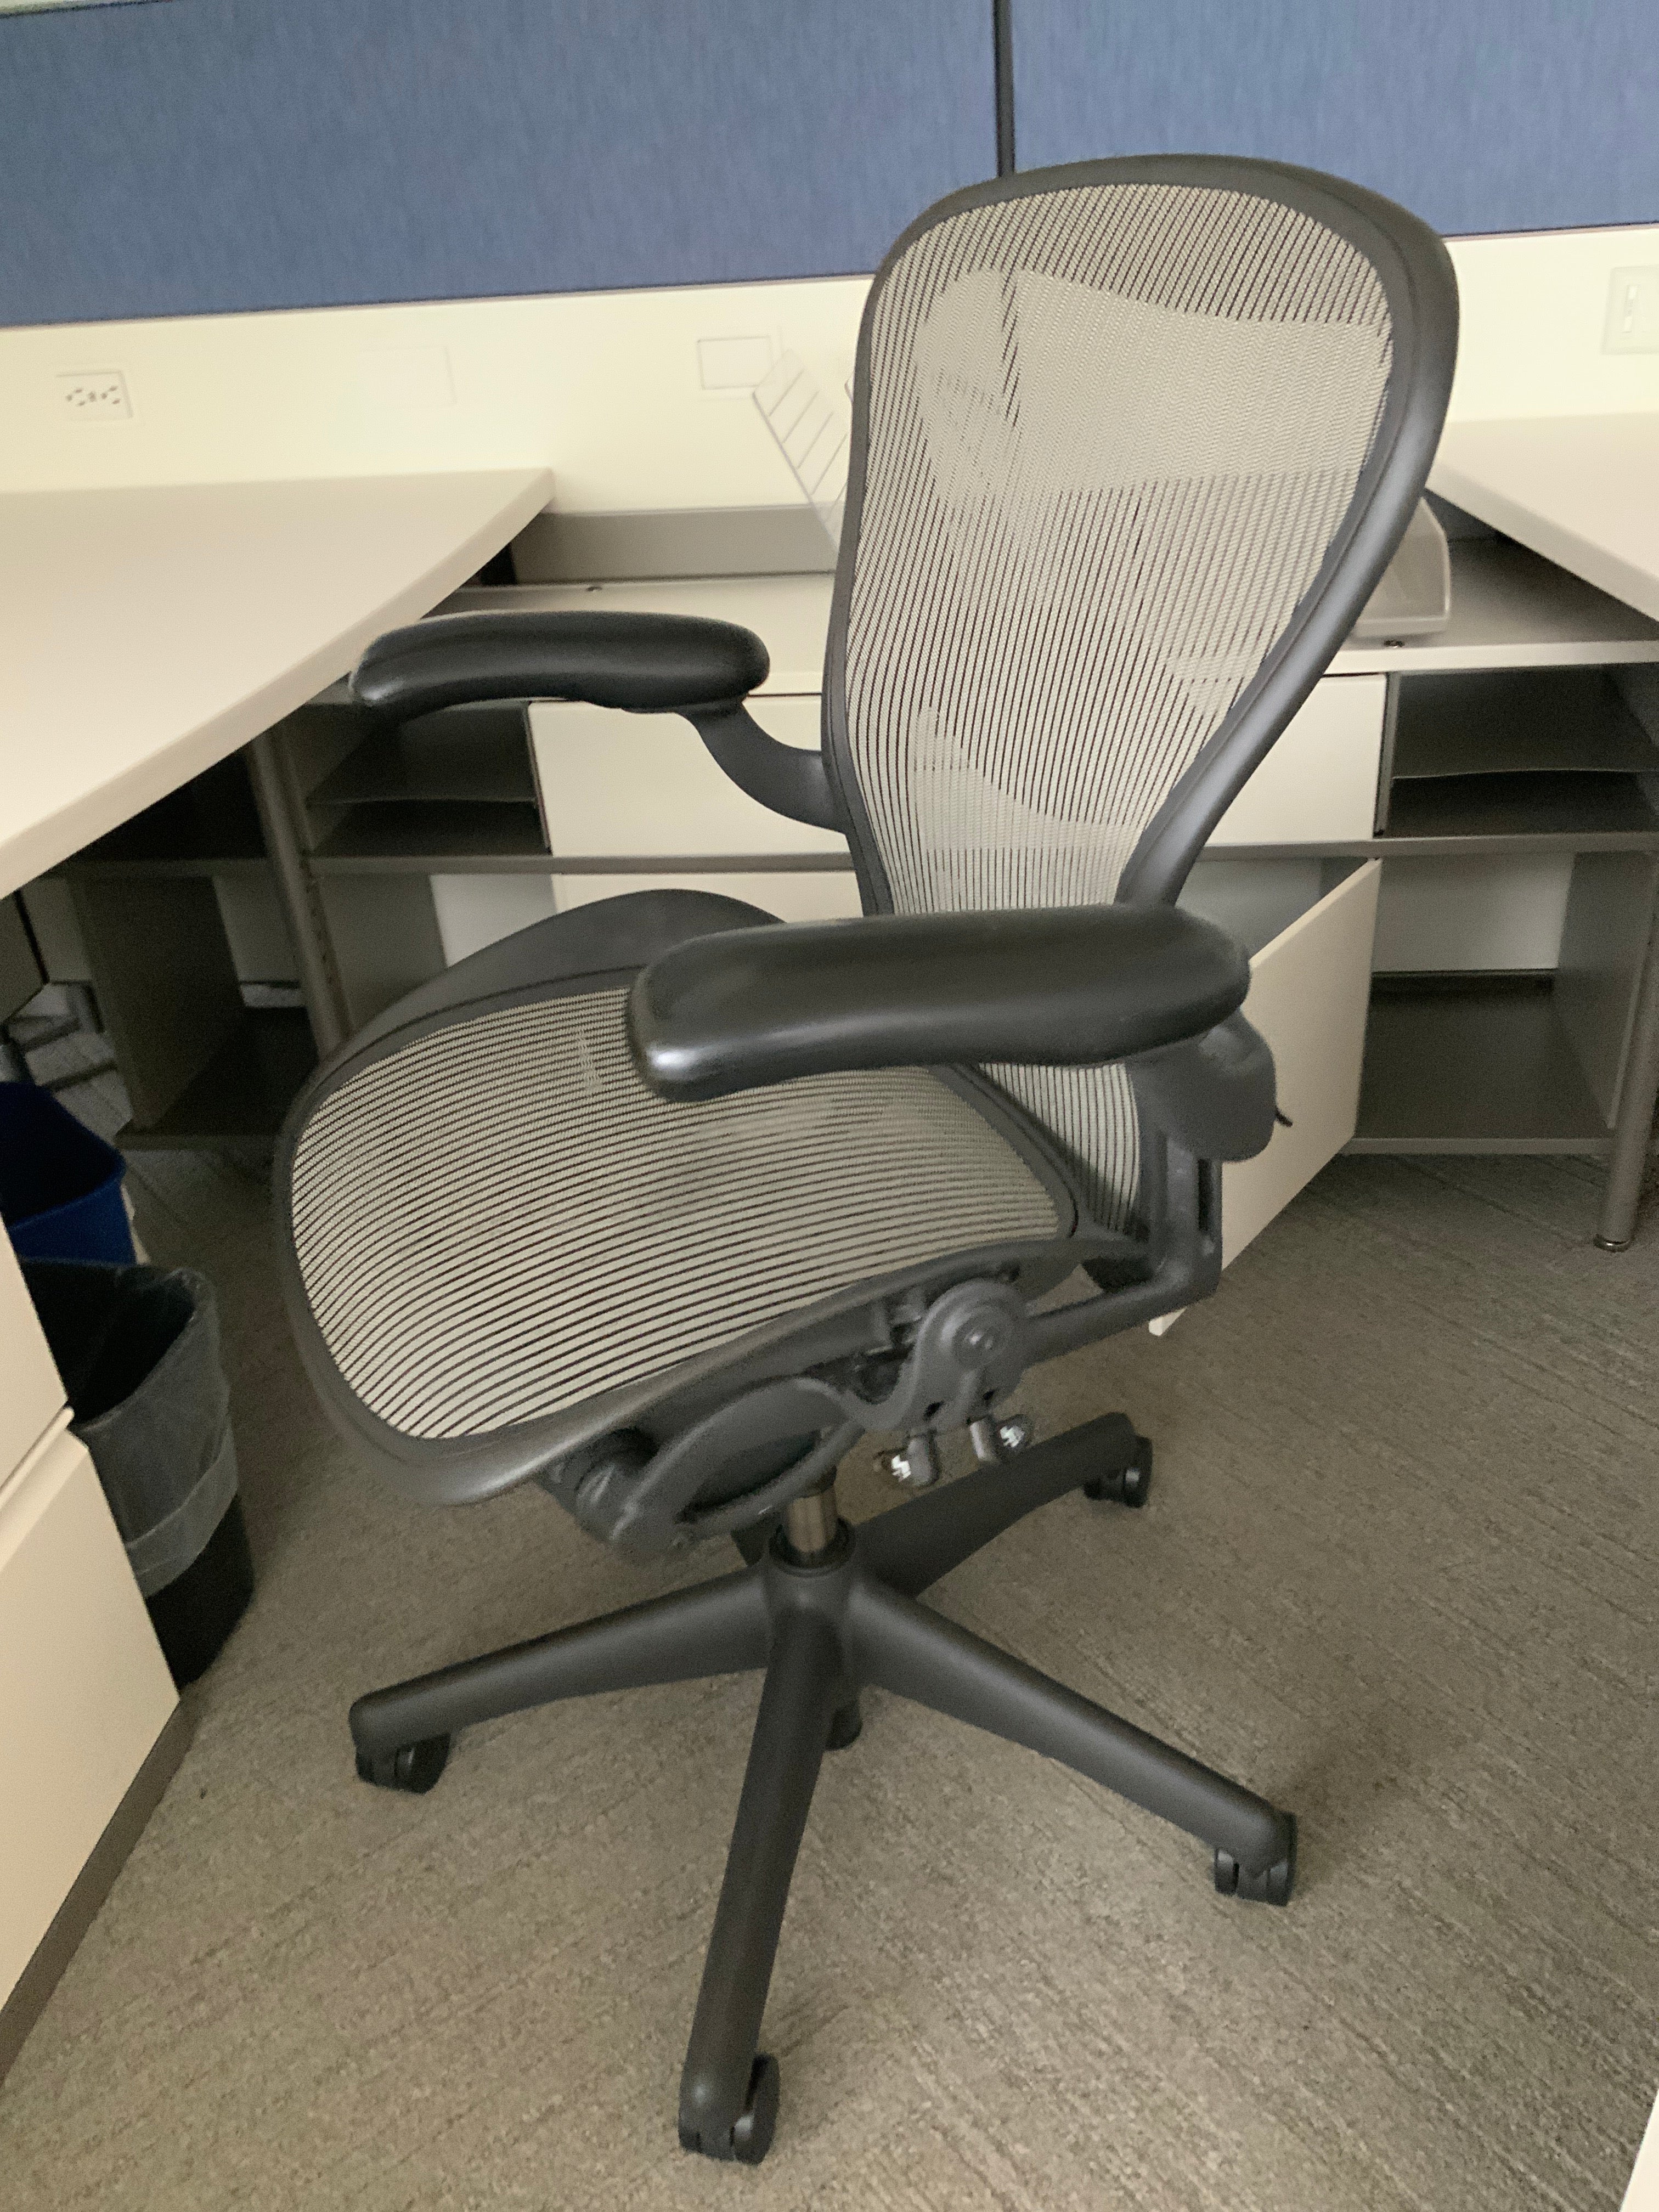 Herman Miller Grey Aeron Task Chair Size C - Preowned - FOB Vernon Hills, IL (Min Purchase Qty = 20)